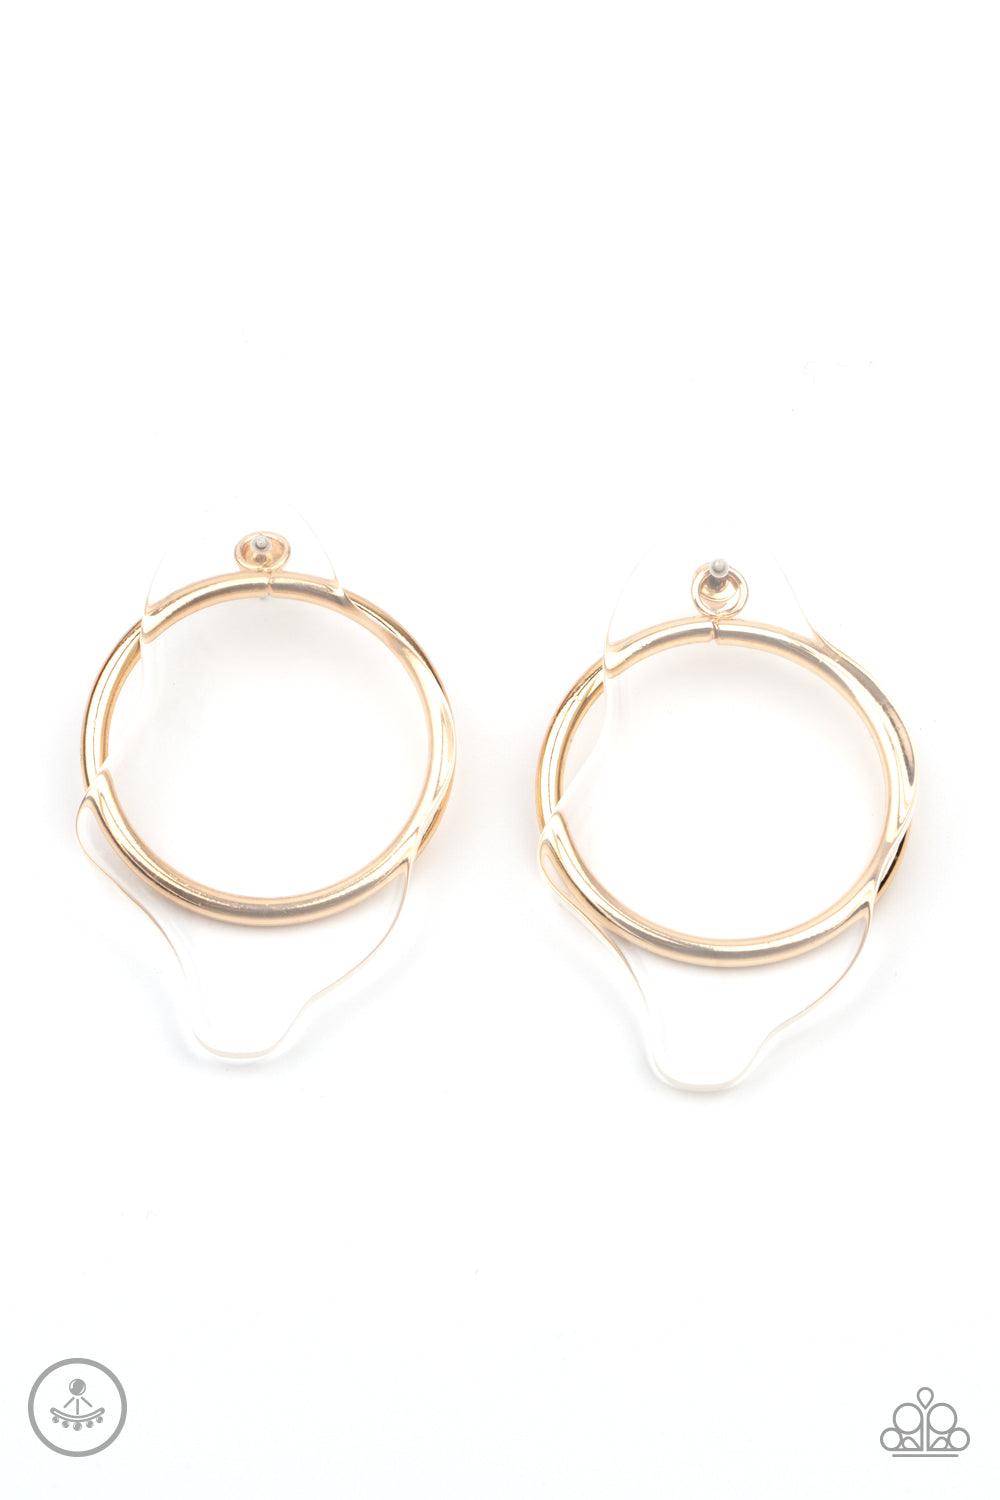 Paparazzi Accessories Clear The Way! - Gold An asymmetrical piece of clear acrylic overlaps a glistening gold hoop, creating a bold display. Earring attaches to a standard post fitting. Sold as one pair of post earrings. Jewelry